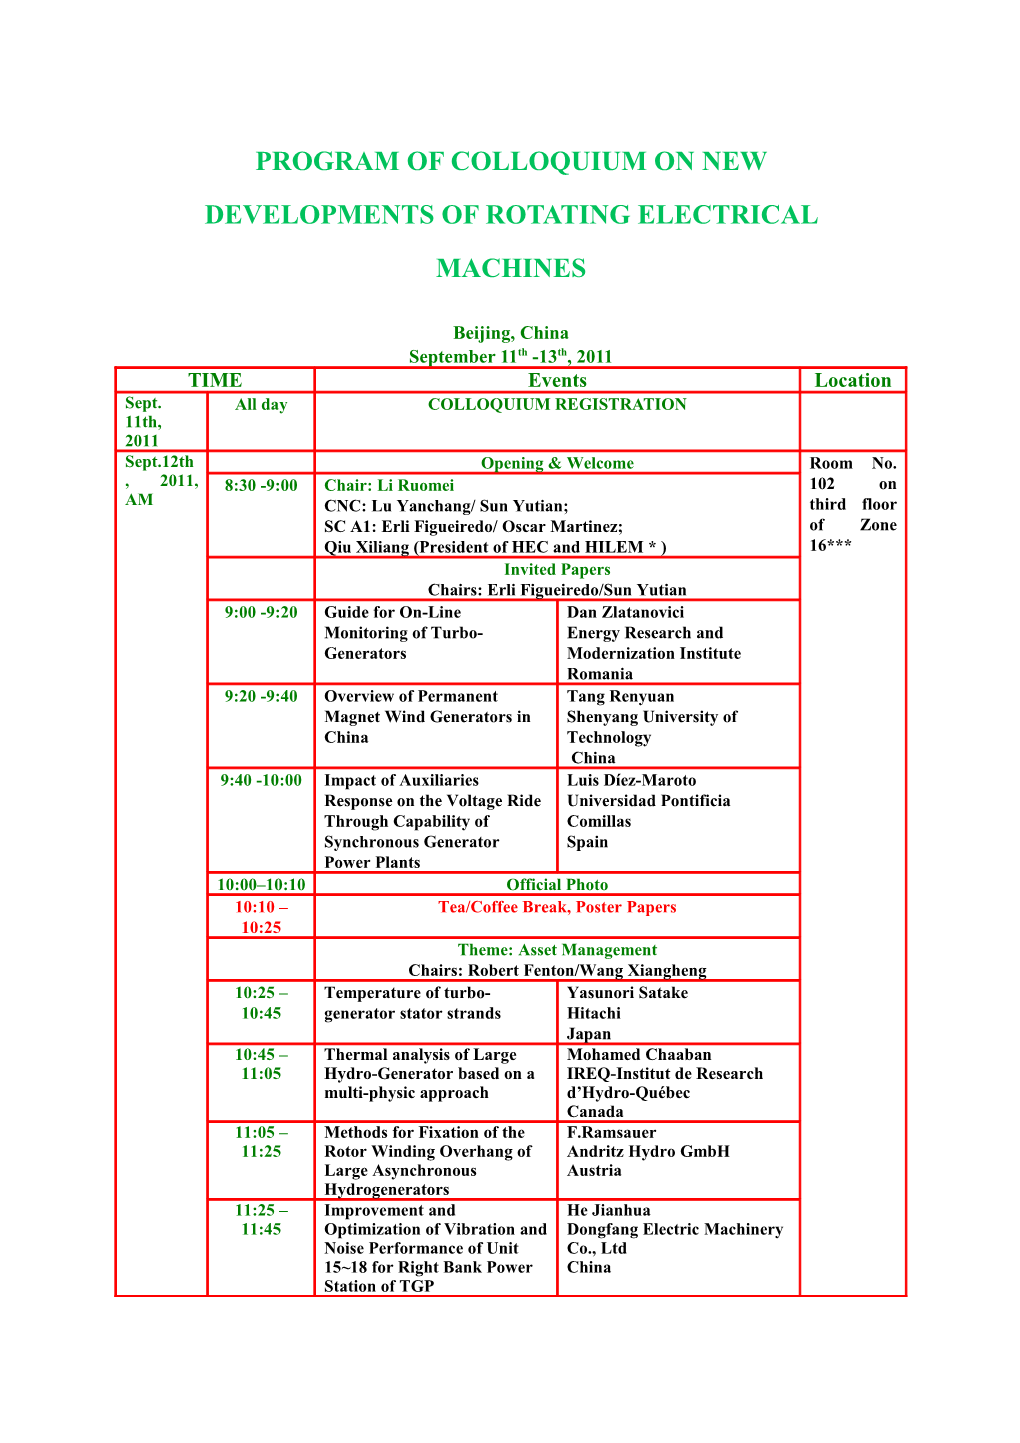 Program of Colloquium on New Developments of Rotating Electrical Machines